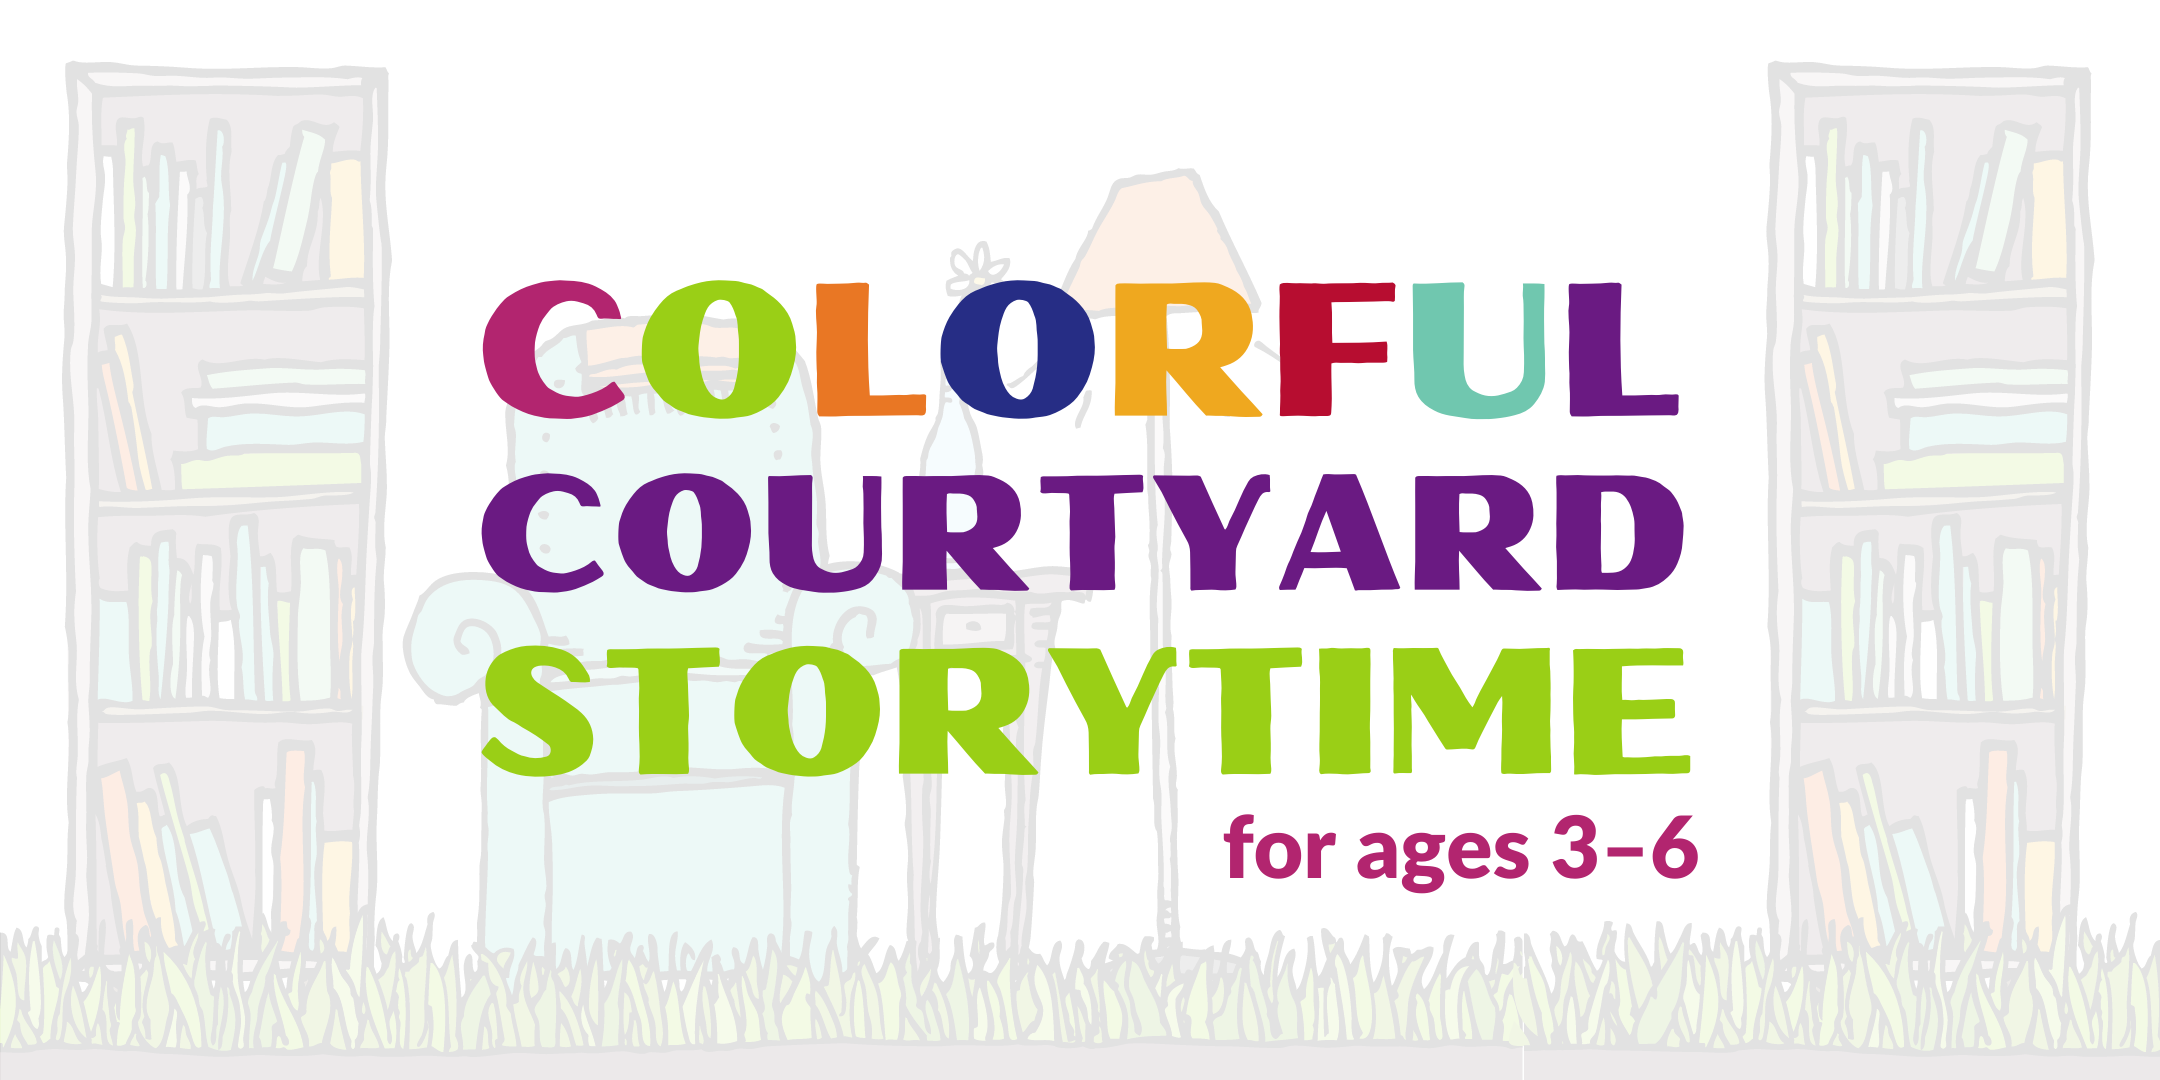 Colorful Courtyard Storytime for ages 3-6 image